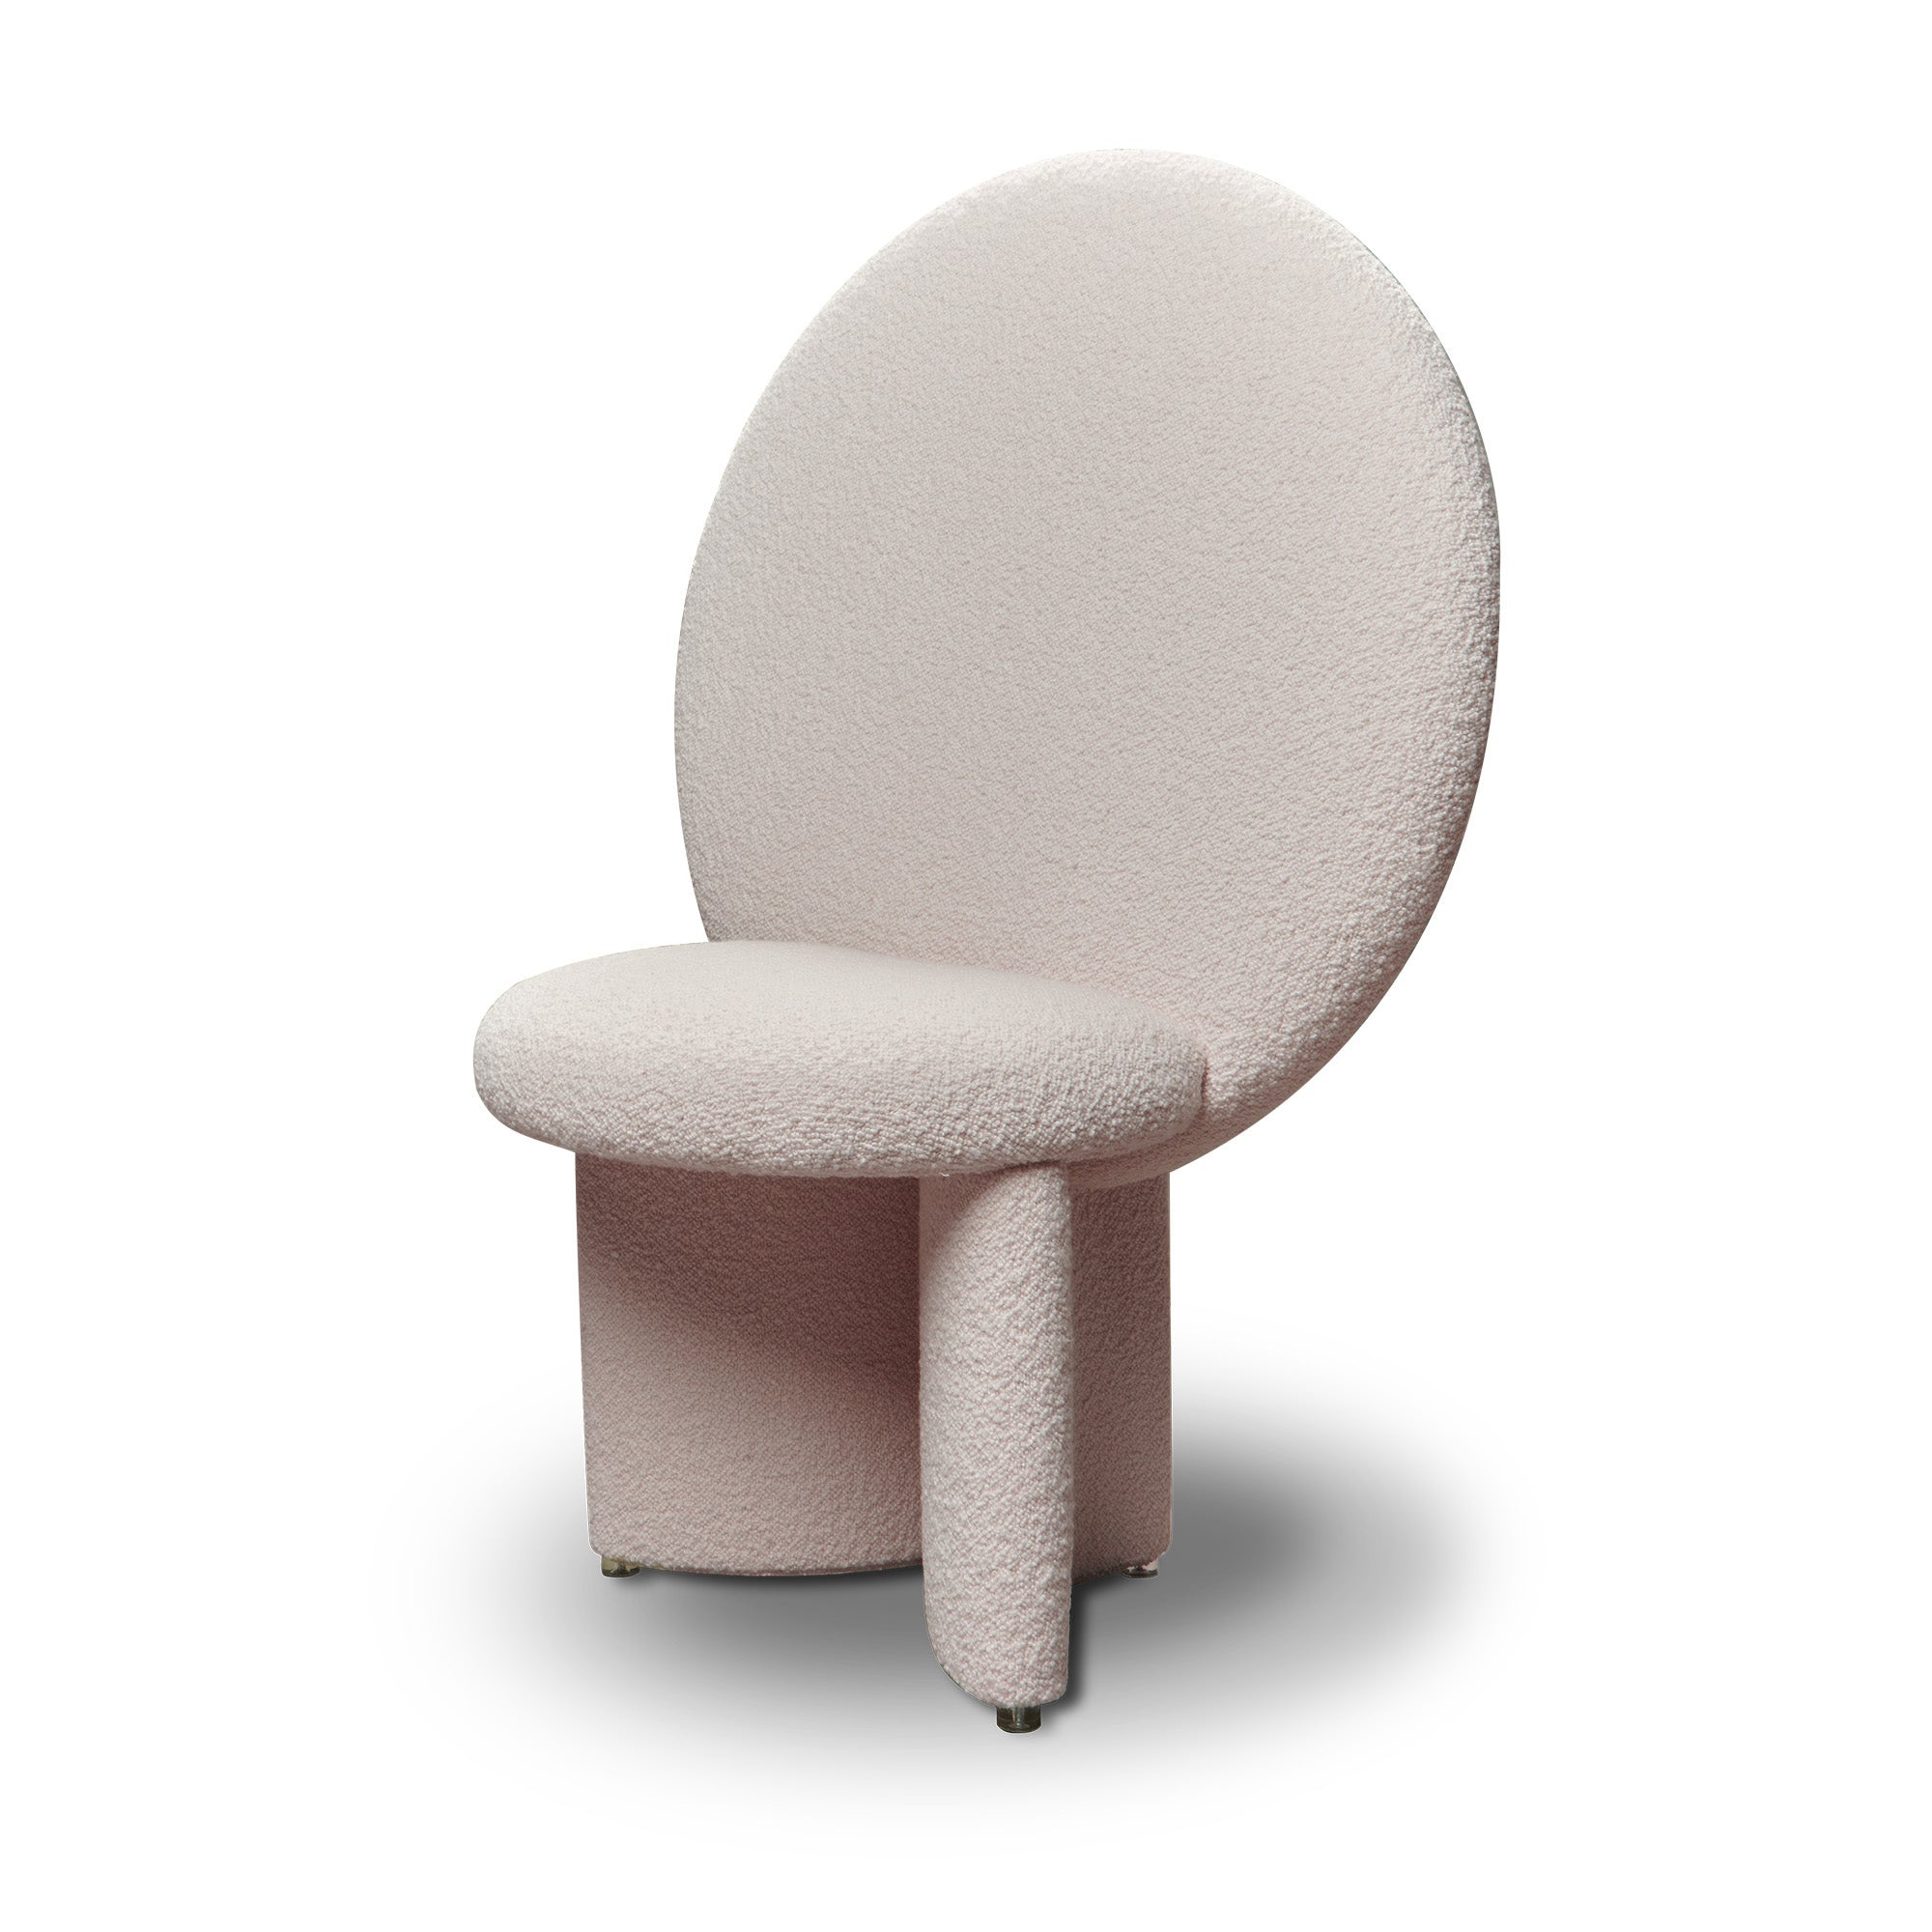 AFTERNOON CHAIR<br>GREY